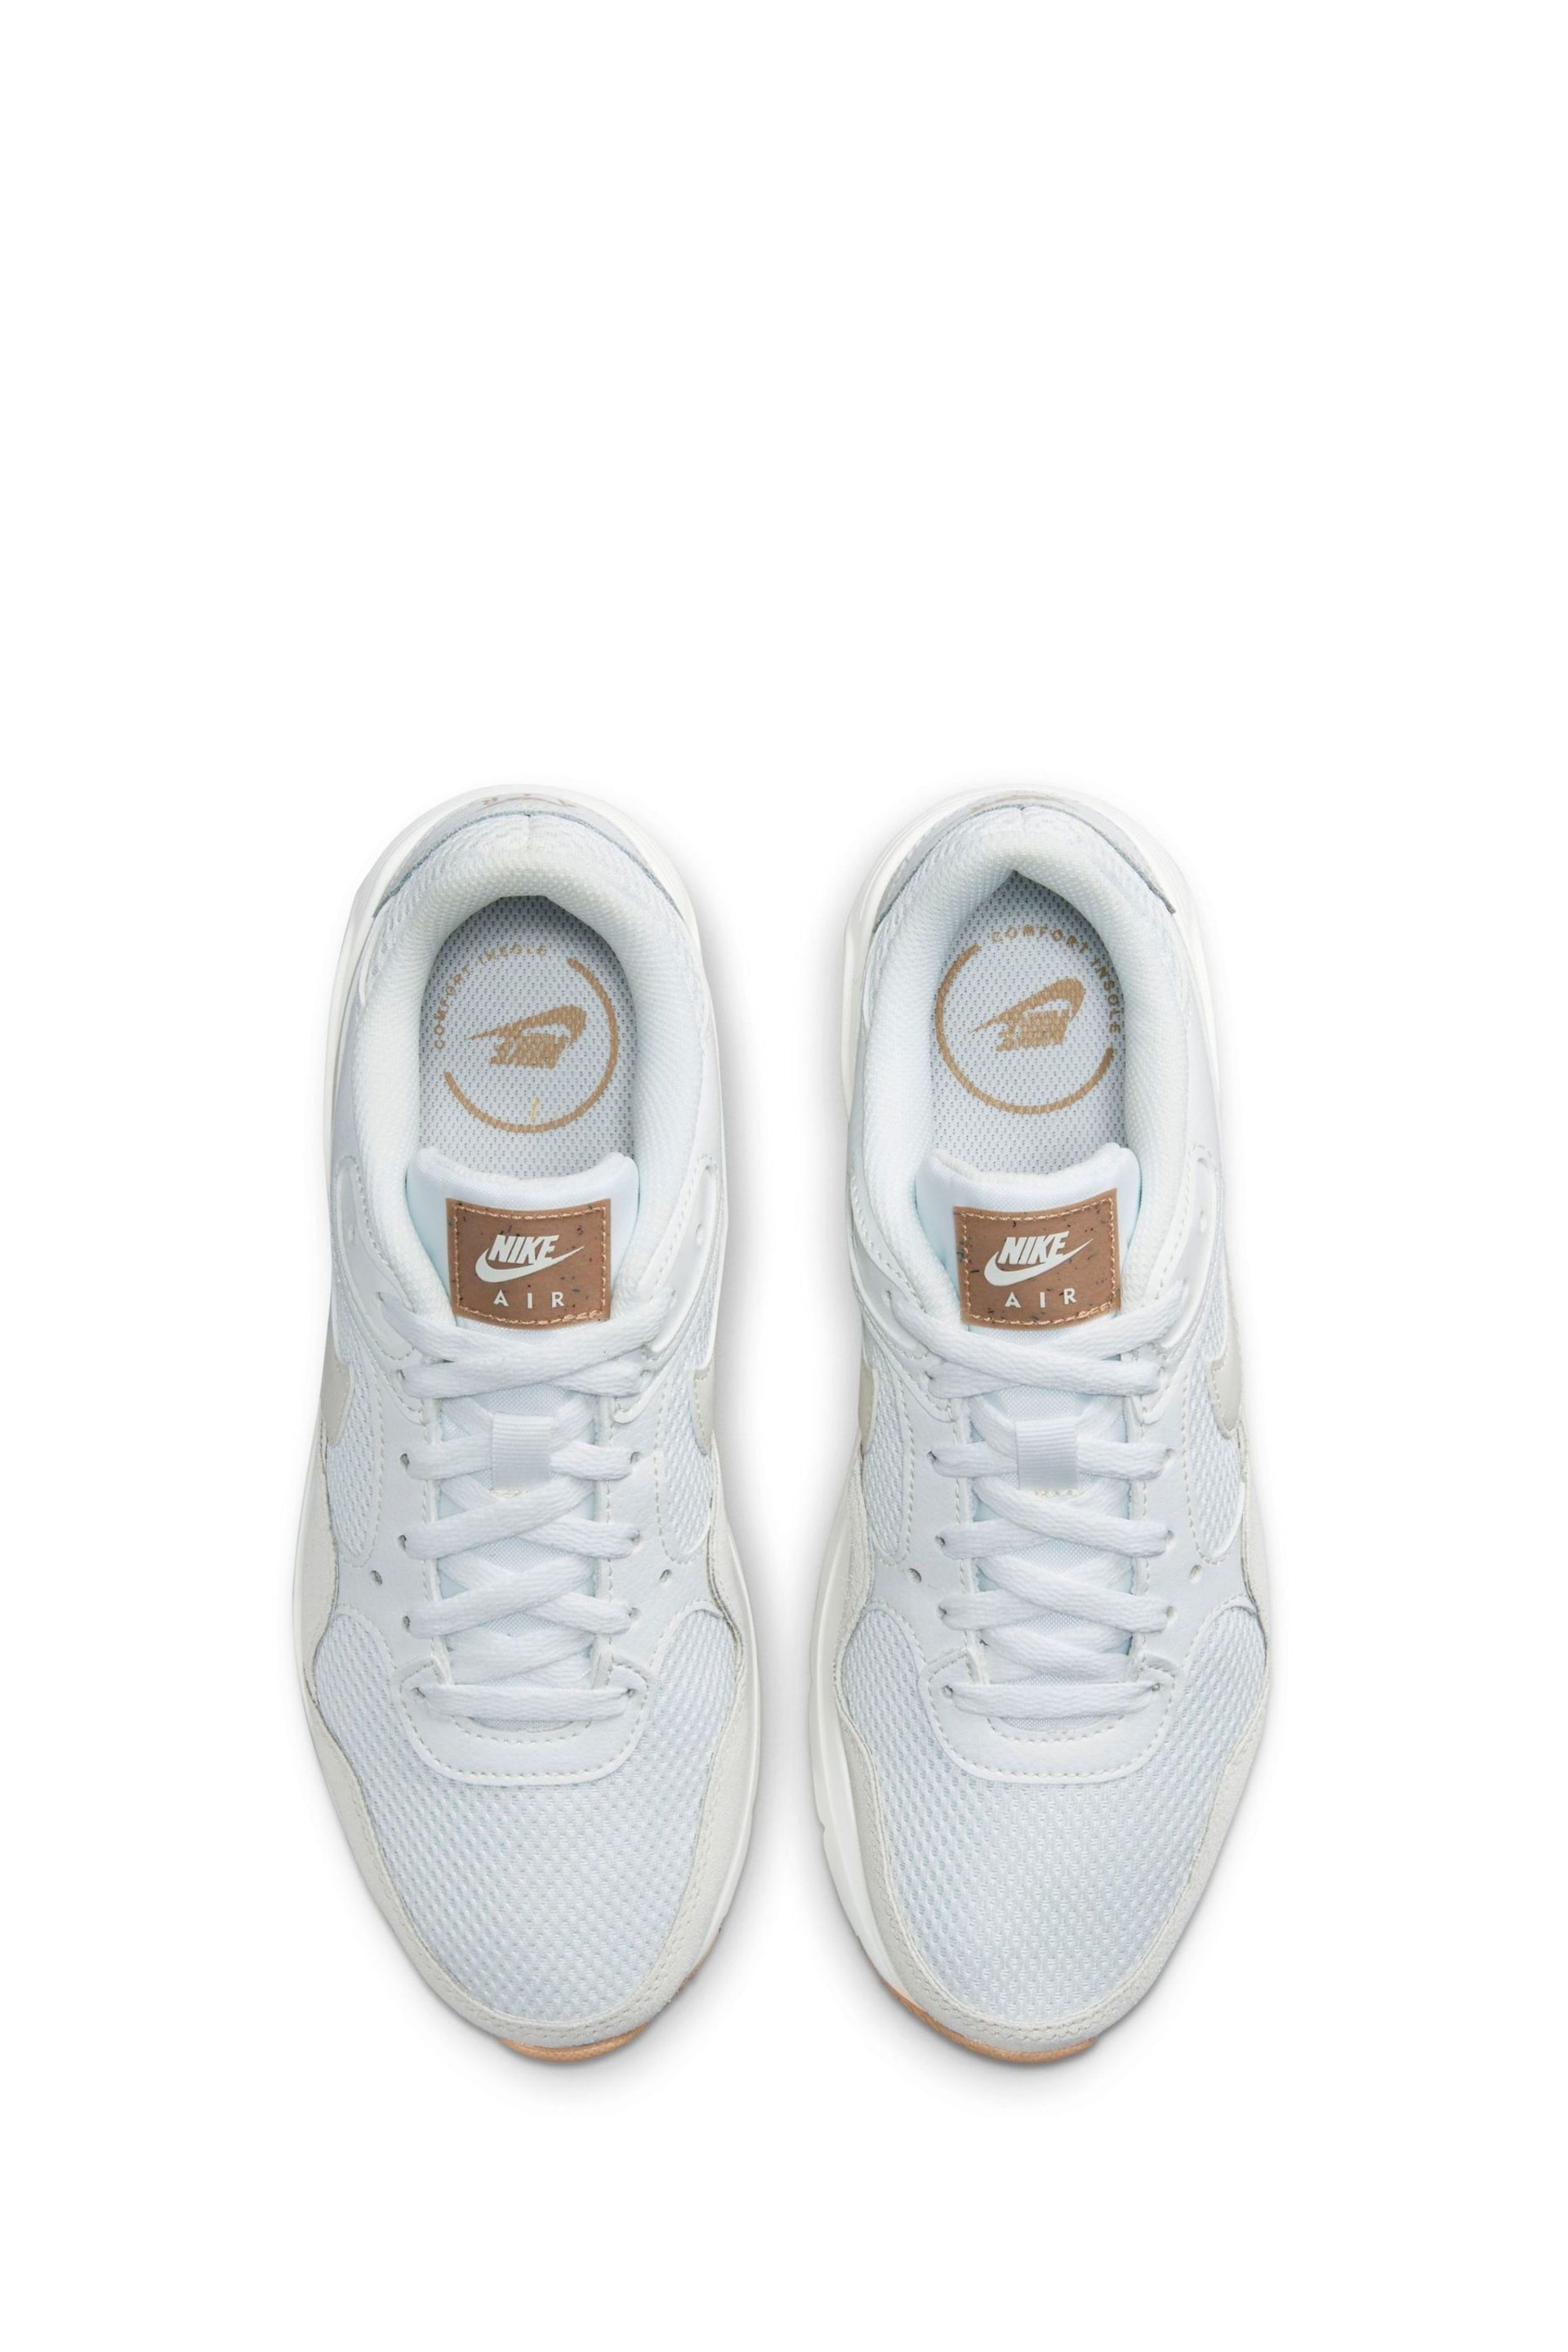 Nike White Air Max SC Trainers - Image 6 of 9